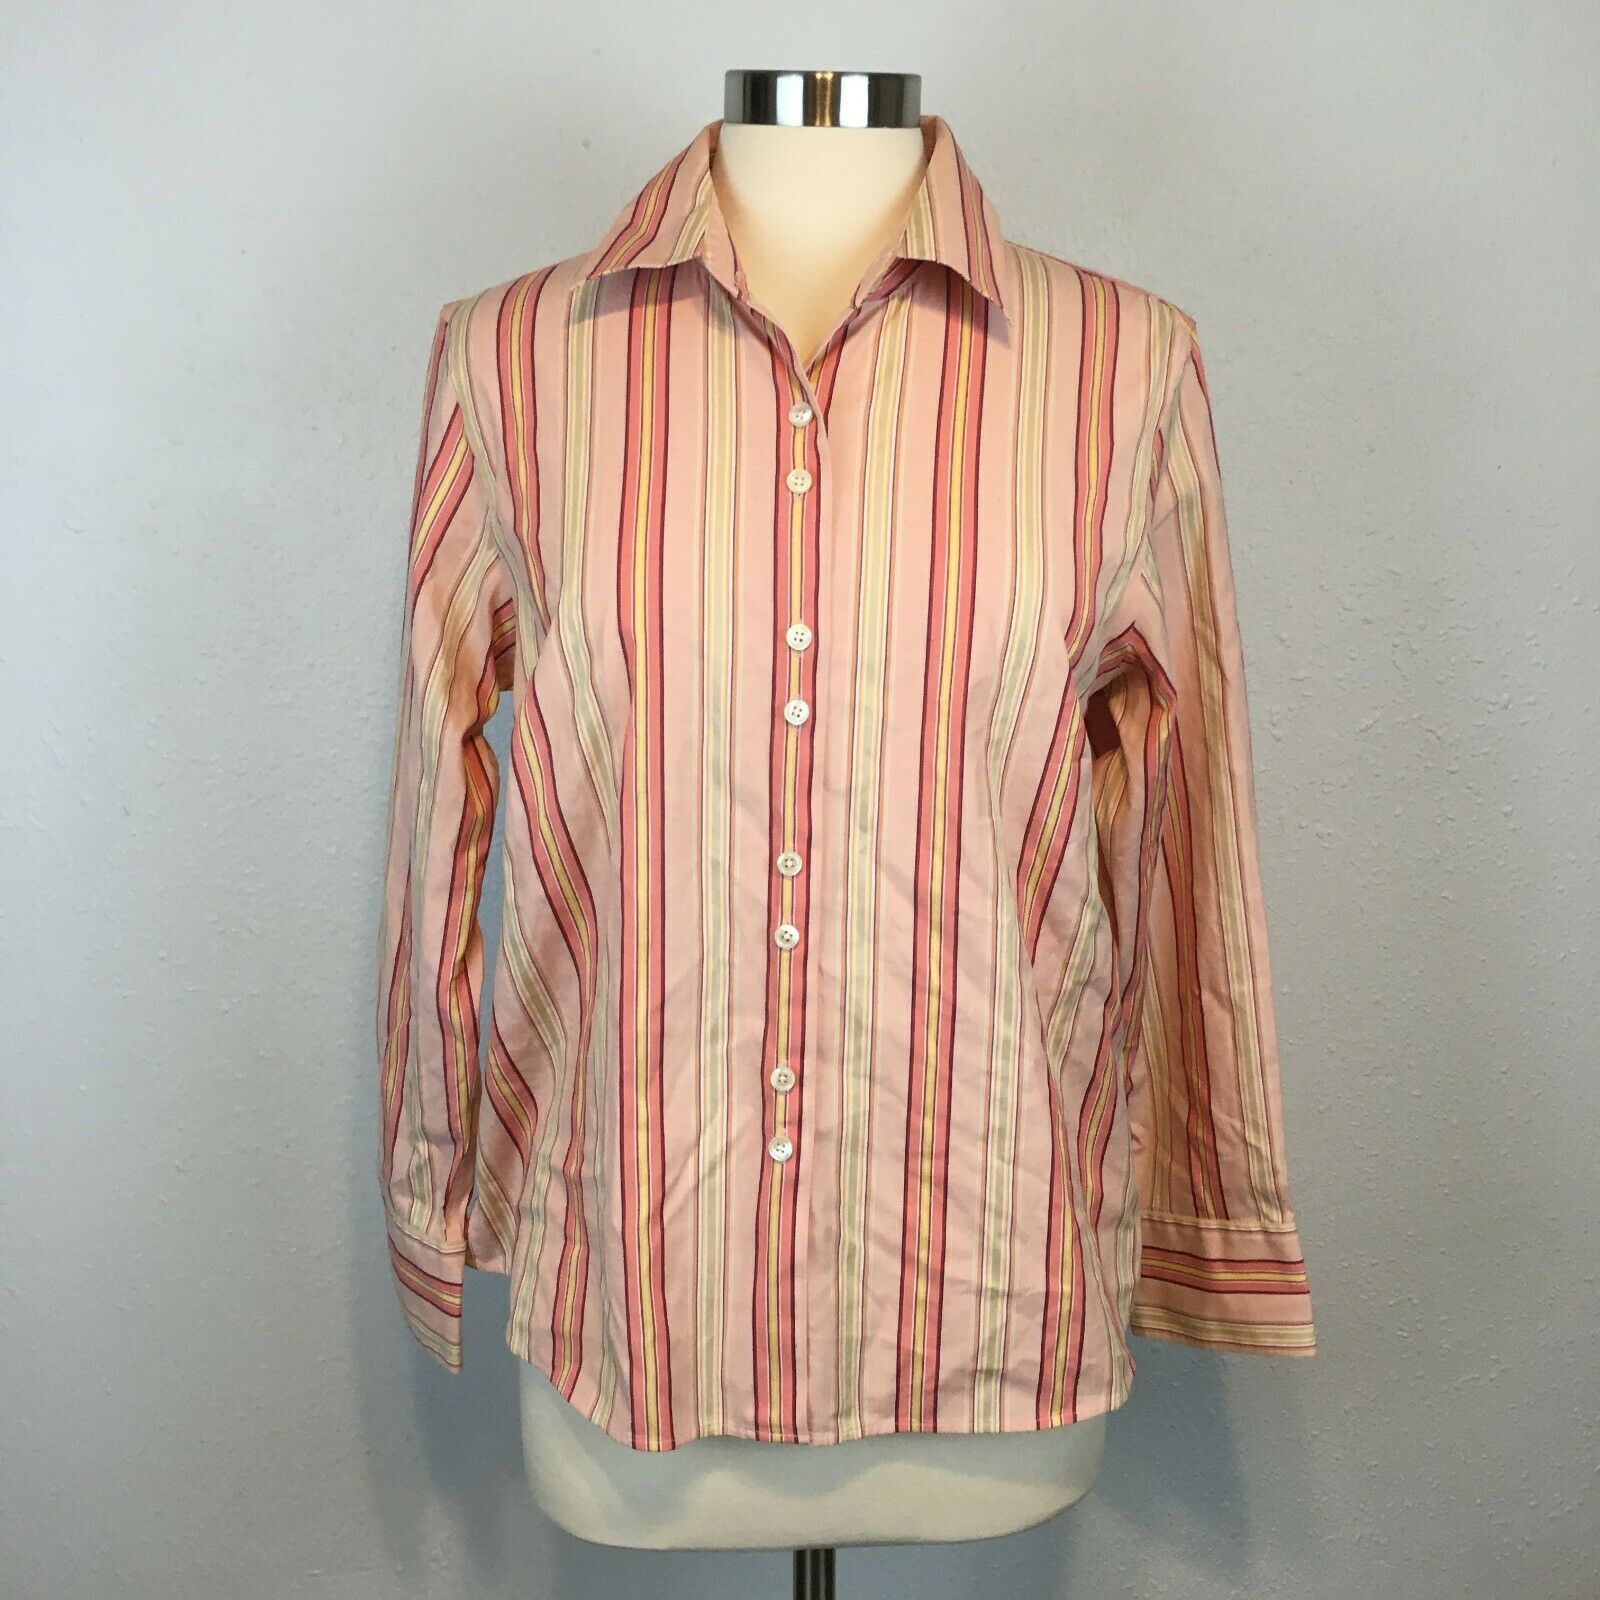 Talbots Women's Pink Striped Classic Button Front Shirt Size 14 Petites ...